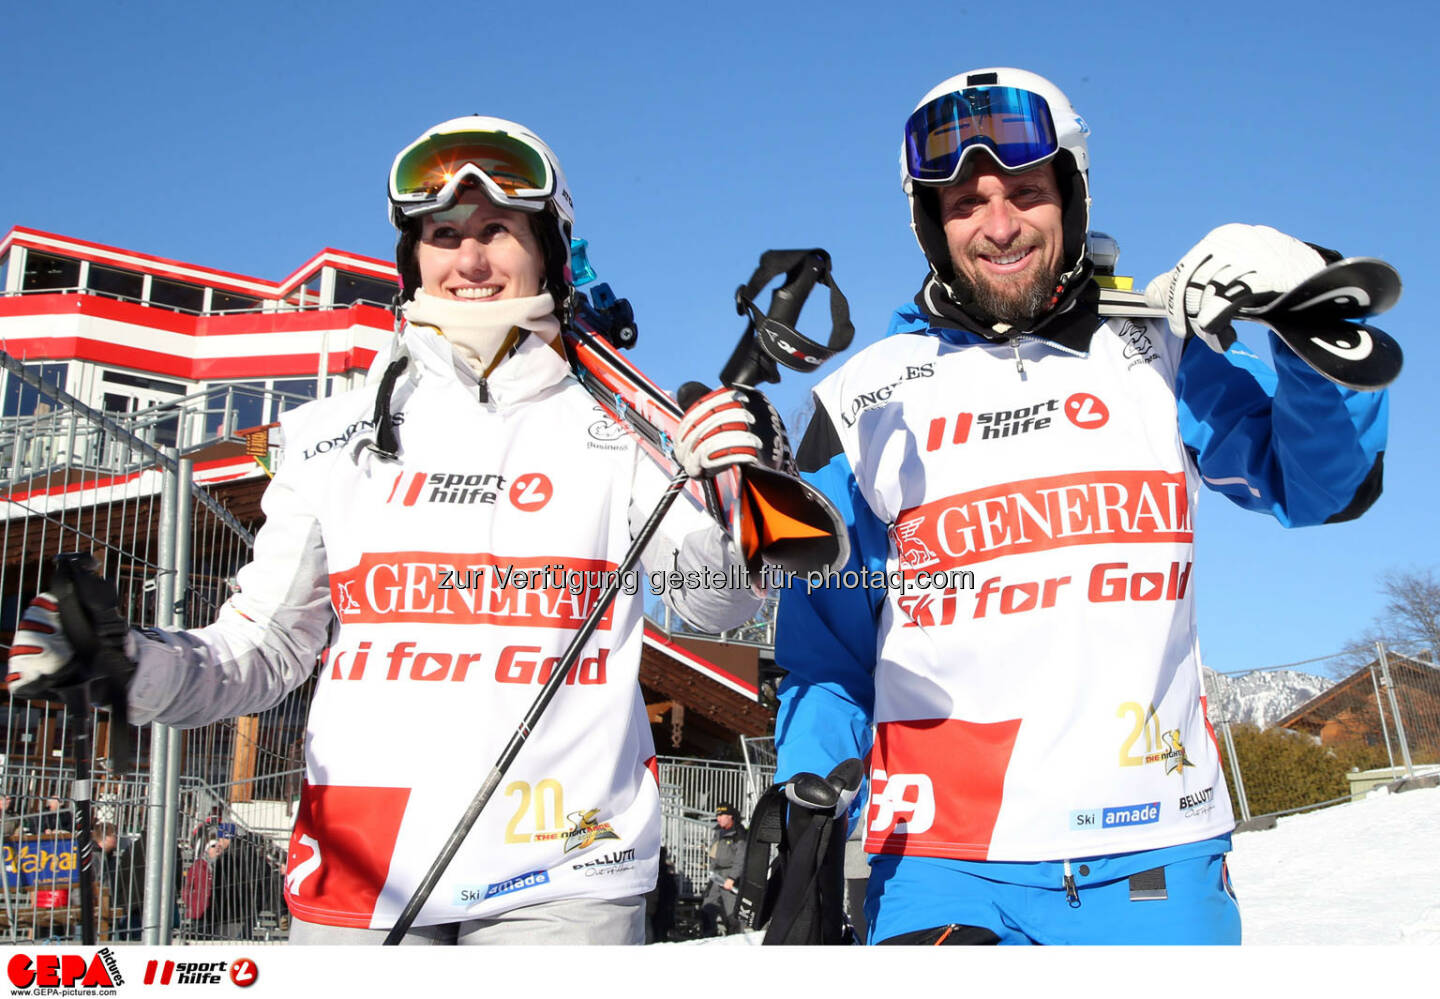 Ski for Gold Charity Race. Image shows Brigitte Kliment-Obermoser and Marco Buechel. Photo: GEPA pictures/ Harald Steiner